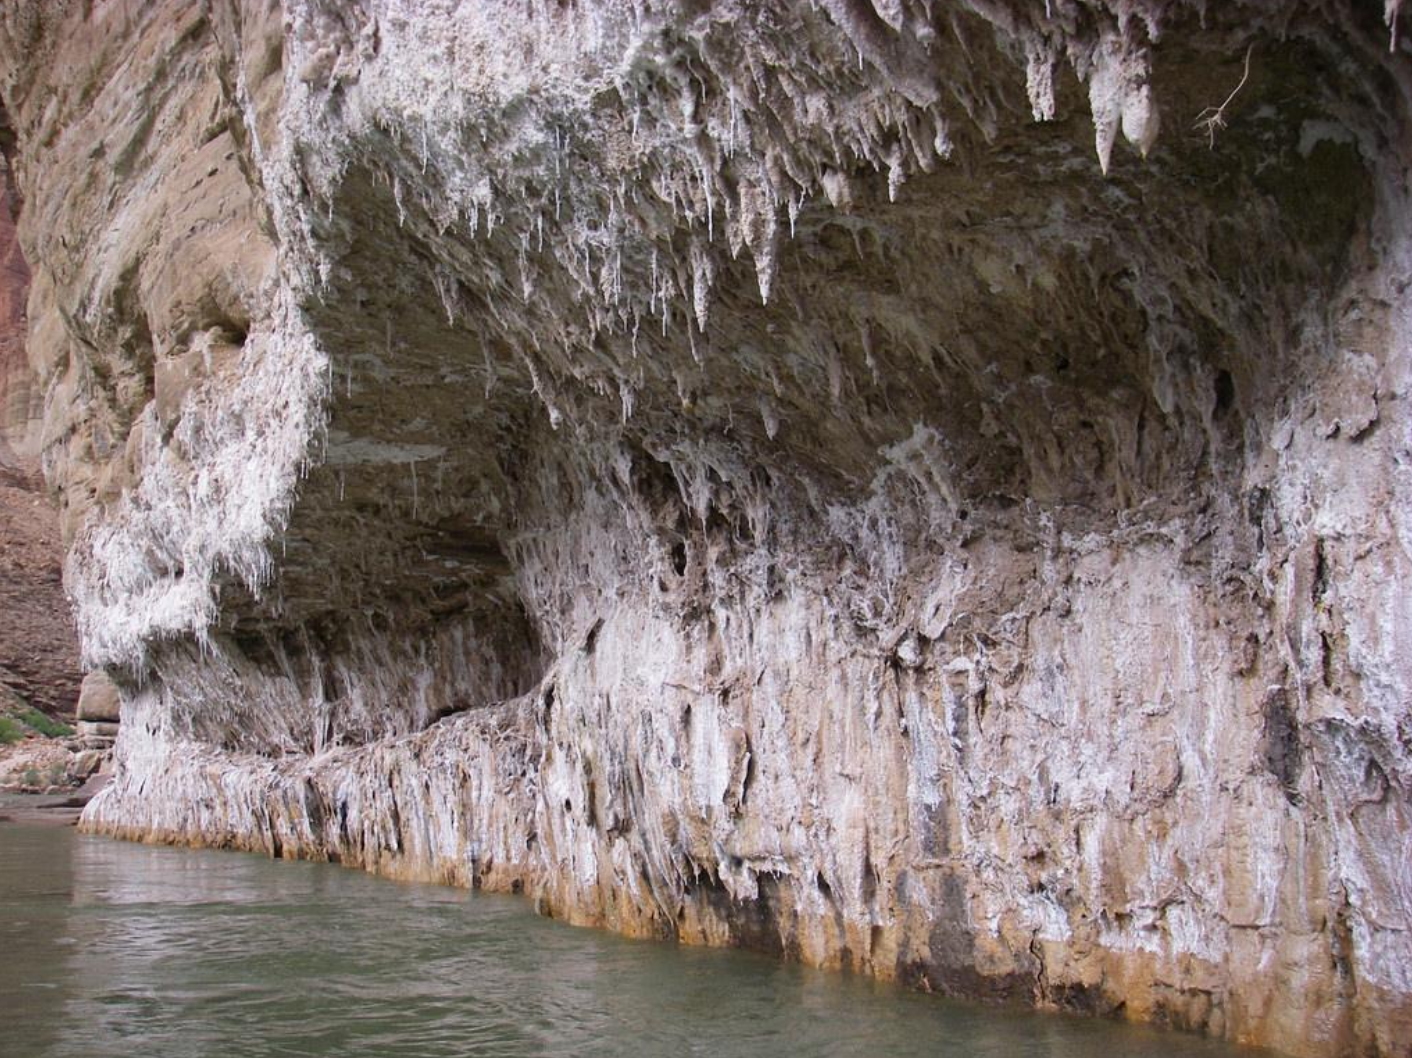 Salt formations accumulate on a Tapeats sandstone cave along the Little Colorado Ricer, a tributary of the Colorado River which runs through the iconic Grand Canyon. These salts are harvested and used by Native Americans.